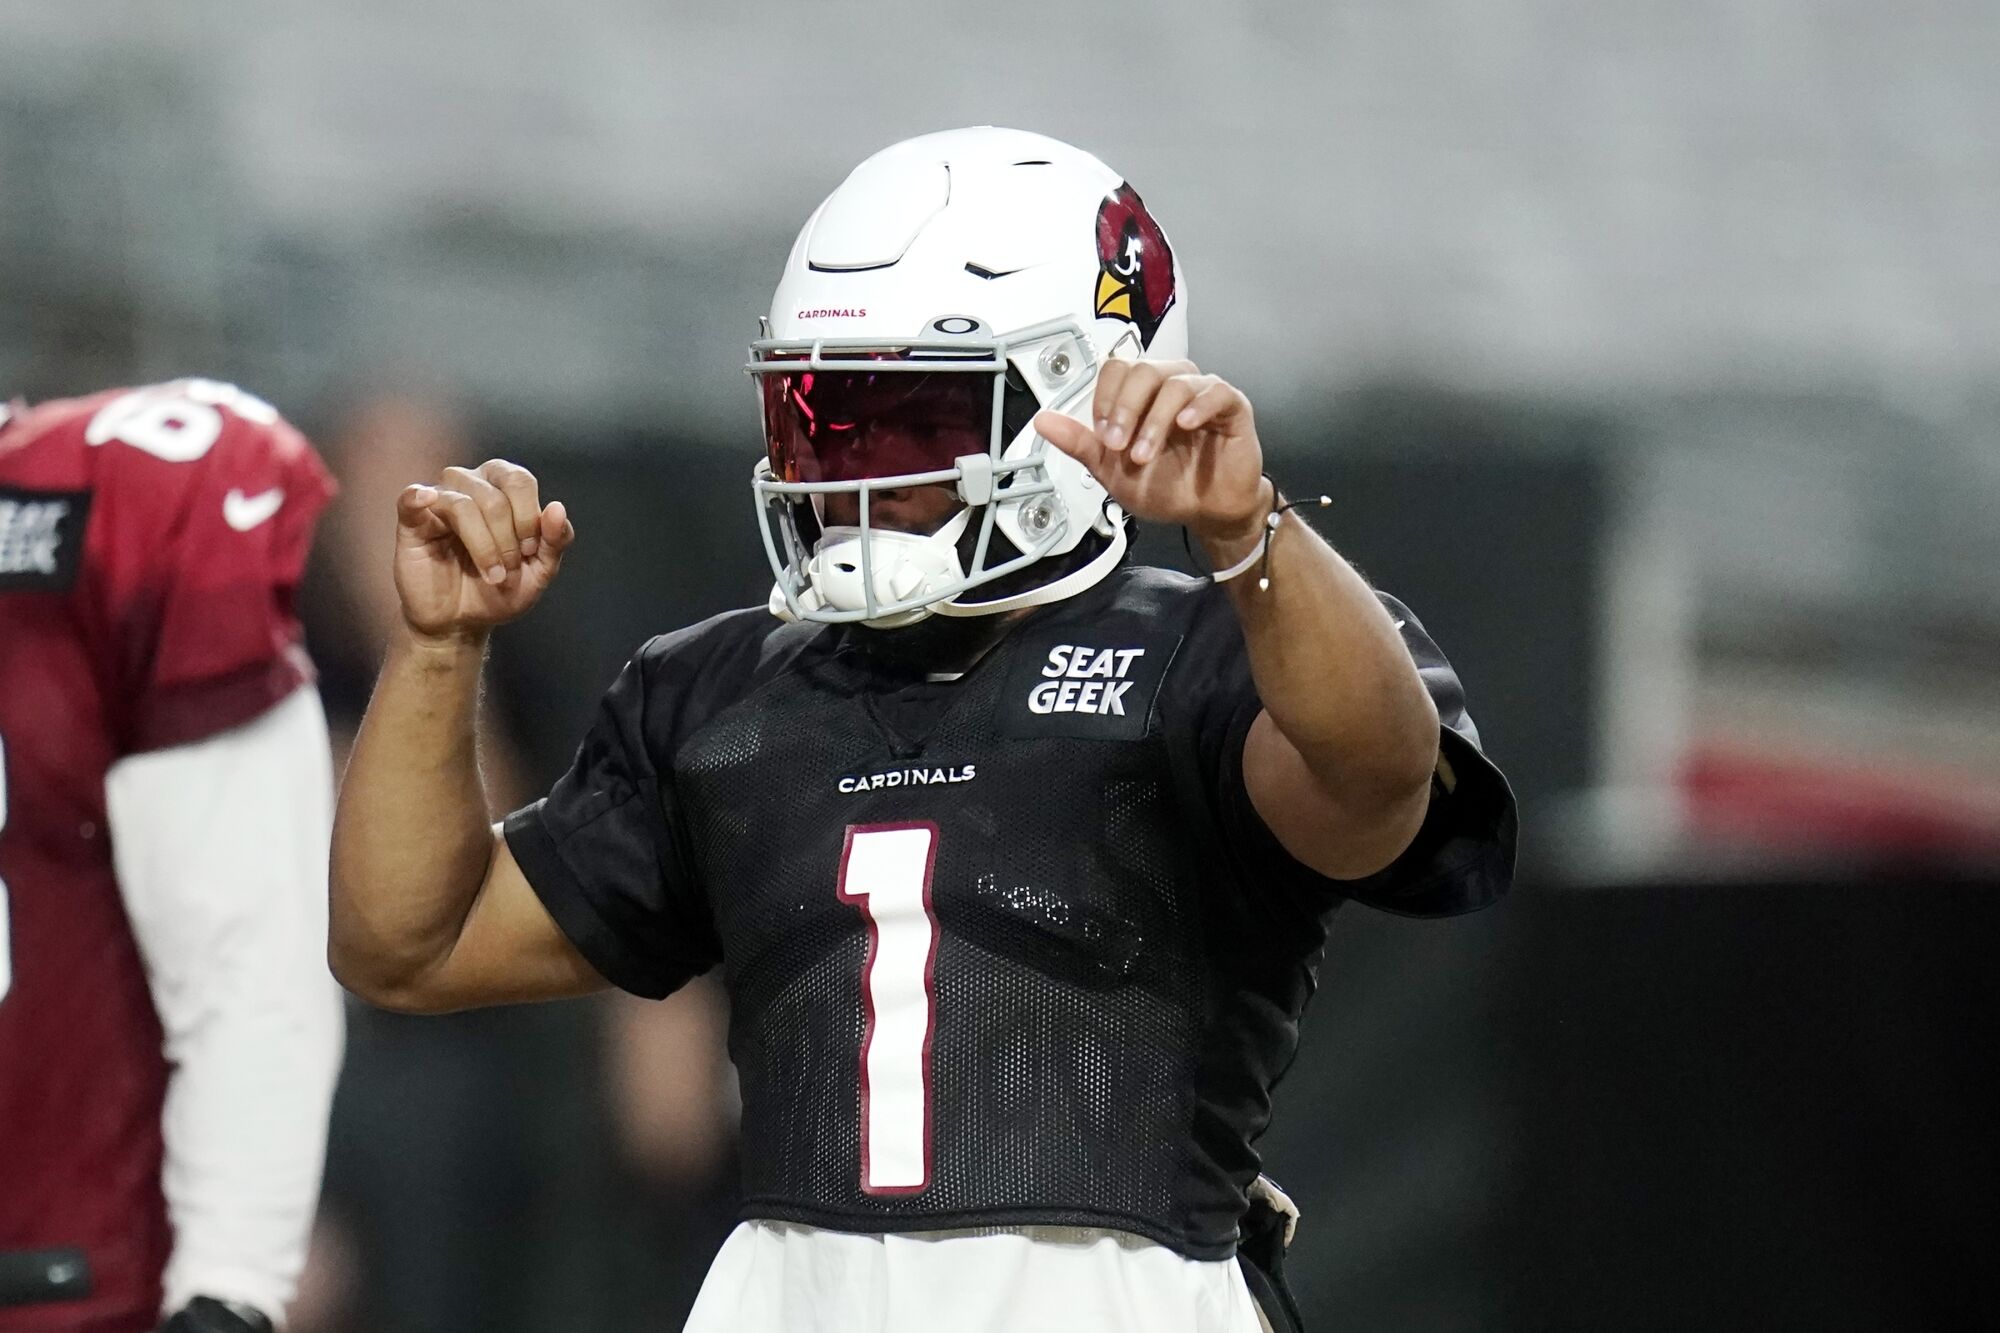 Arizona Cardinals quarterback Kyler Murray signals to receivers while participating in drills.